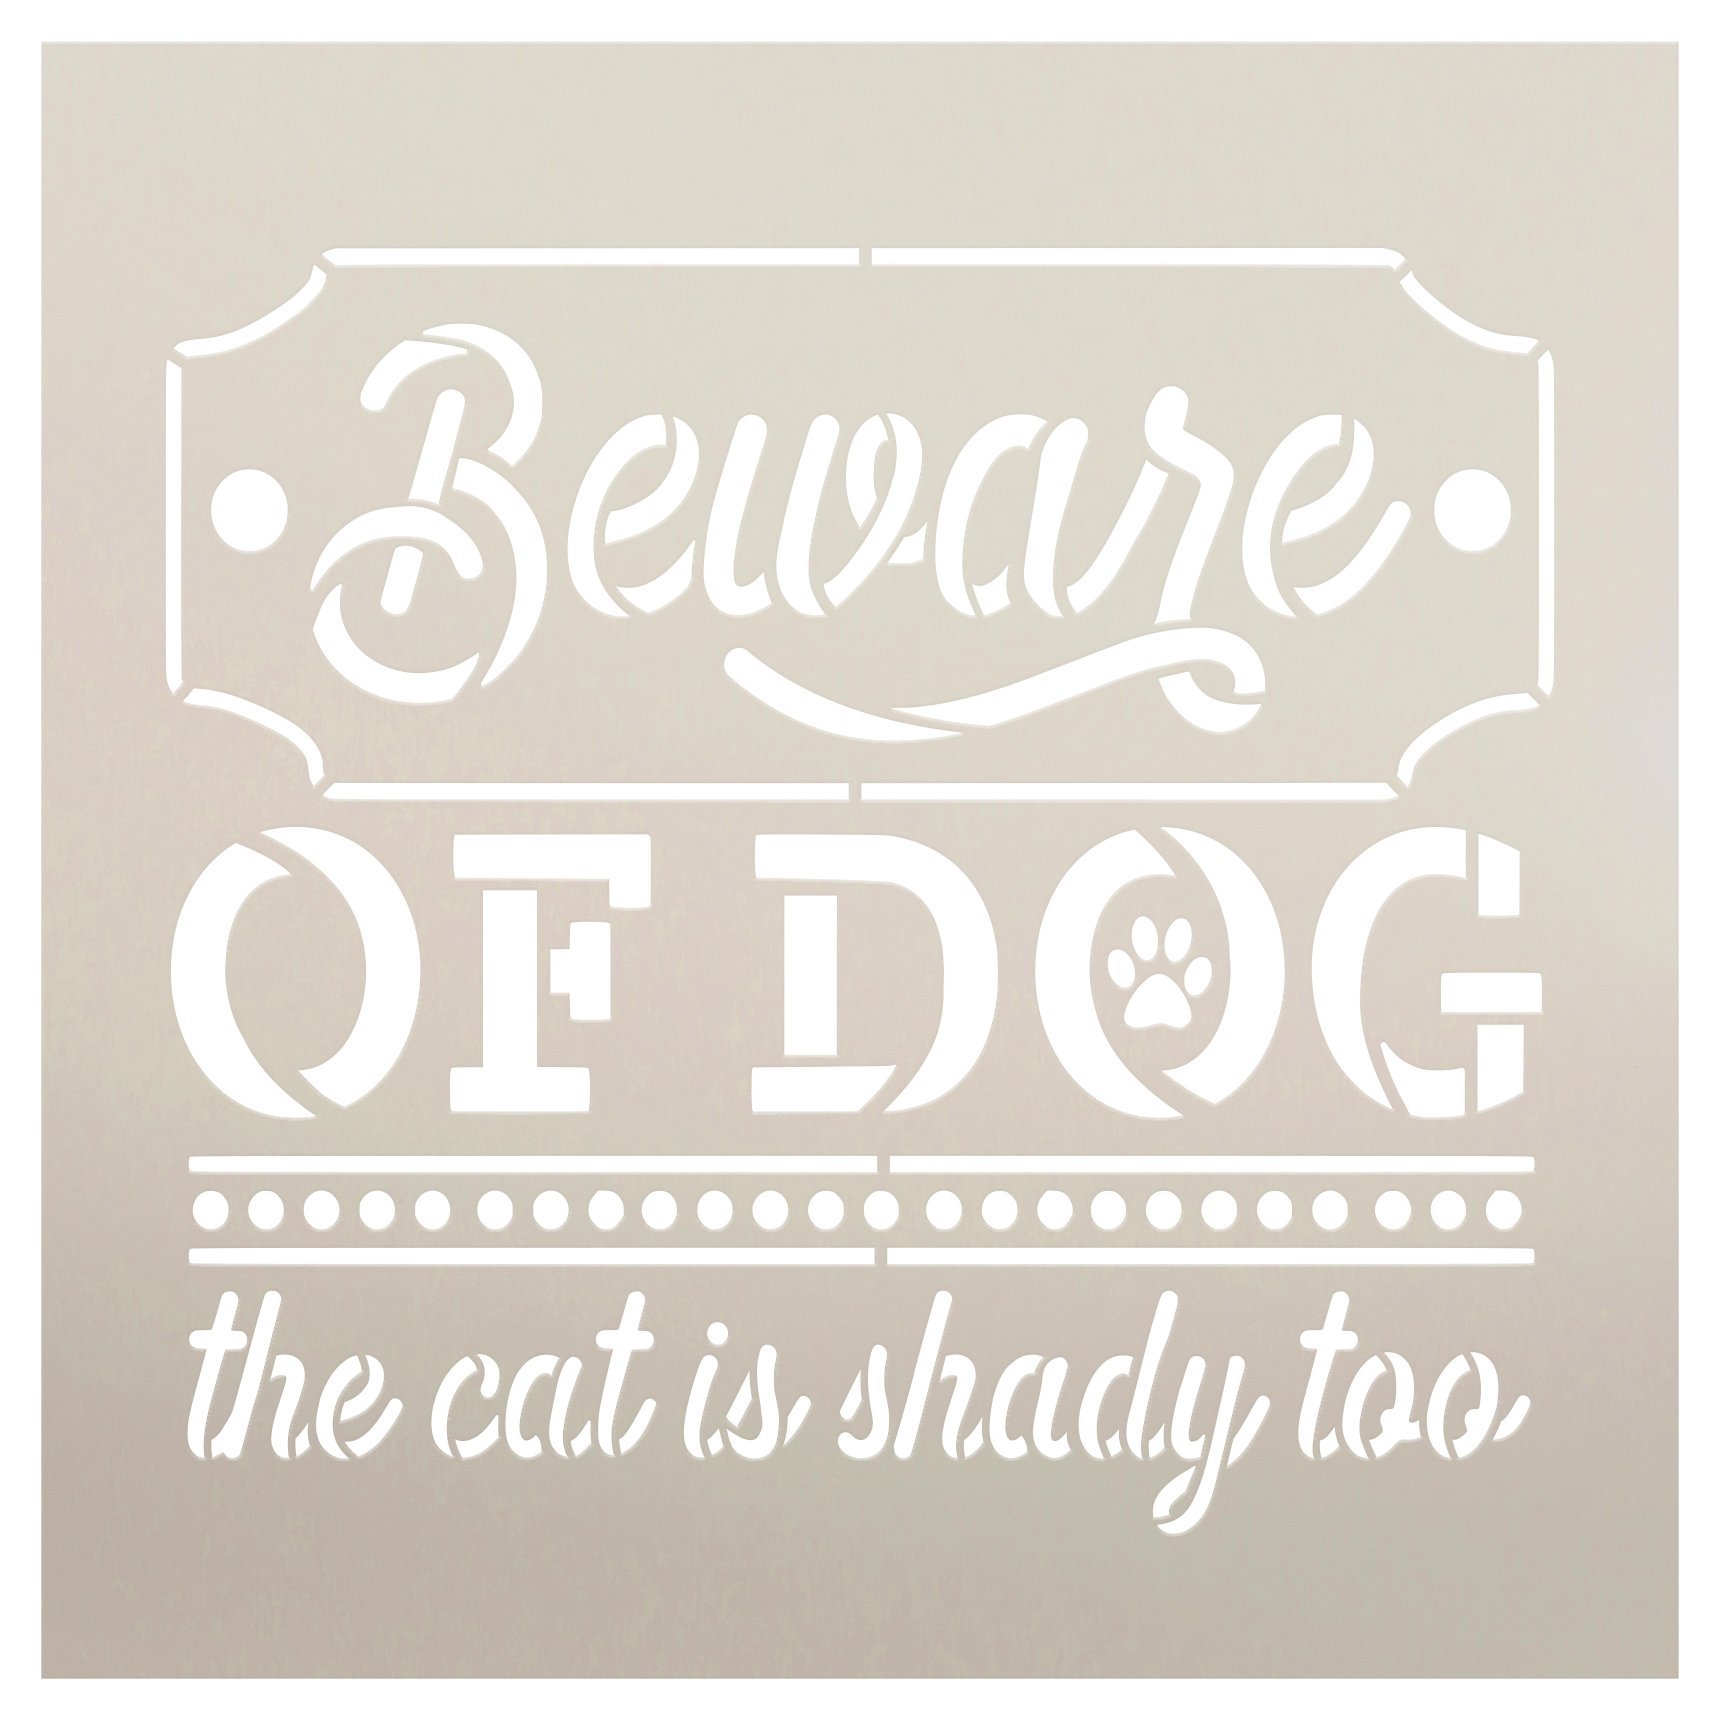 Beware of Dog - Cat is Shady Too Stencil by StudioR12 | Craft DIY Funny Pet Pawprint Home Decor | Paint Wood Sign | Reusable Mylar Template | Select Size